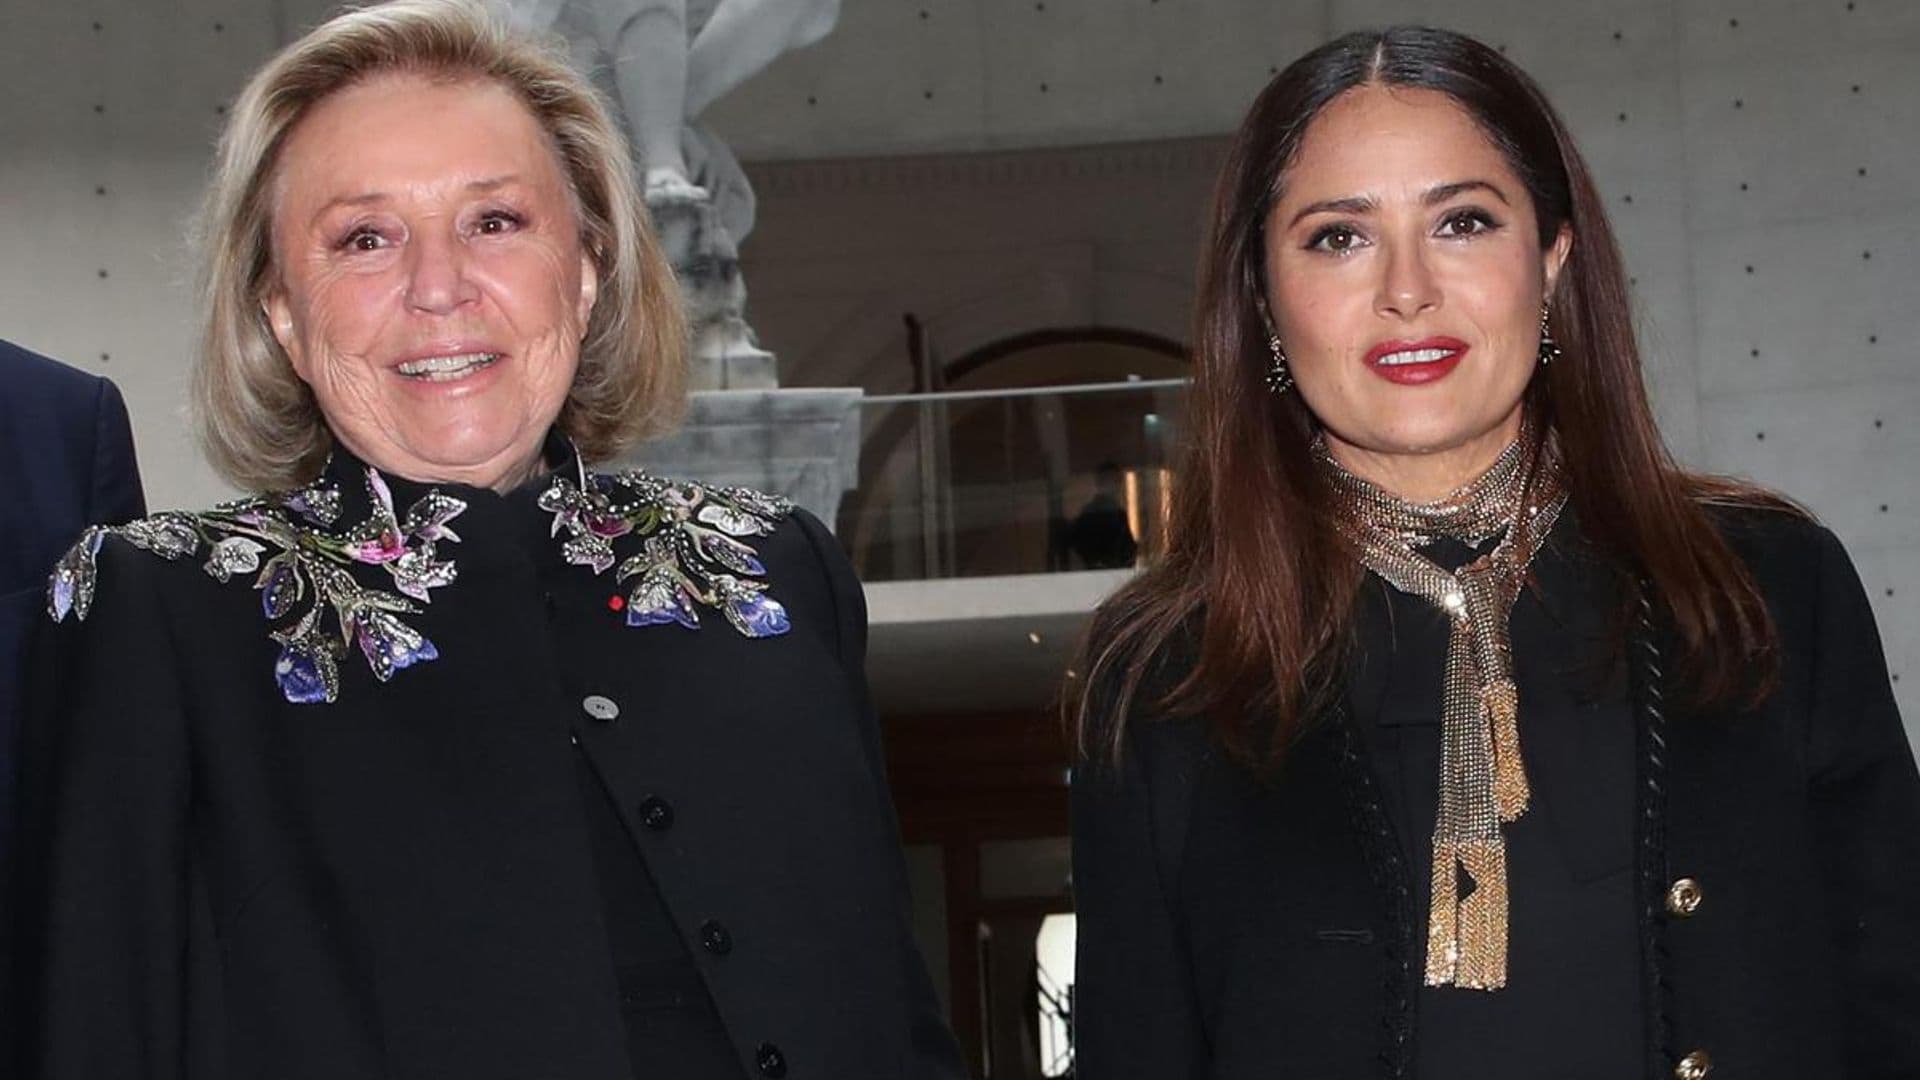 Salma Hayek’s message to her Mother-in-Law